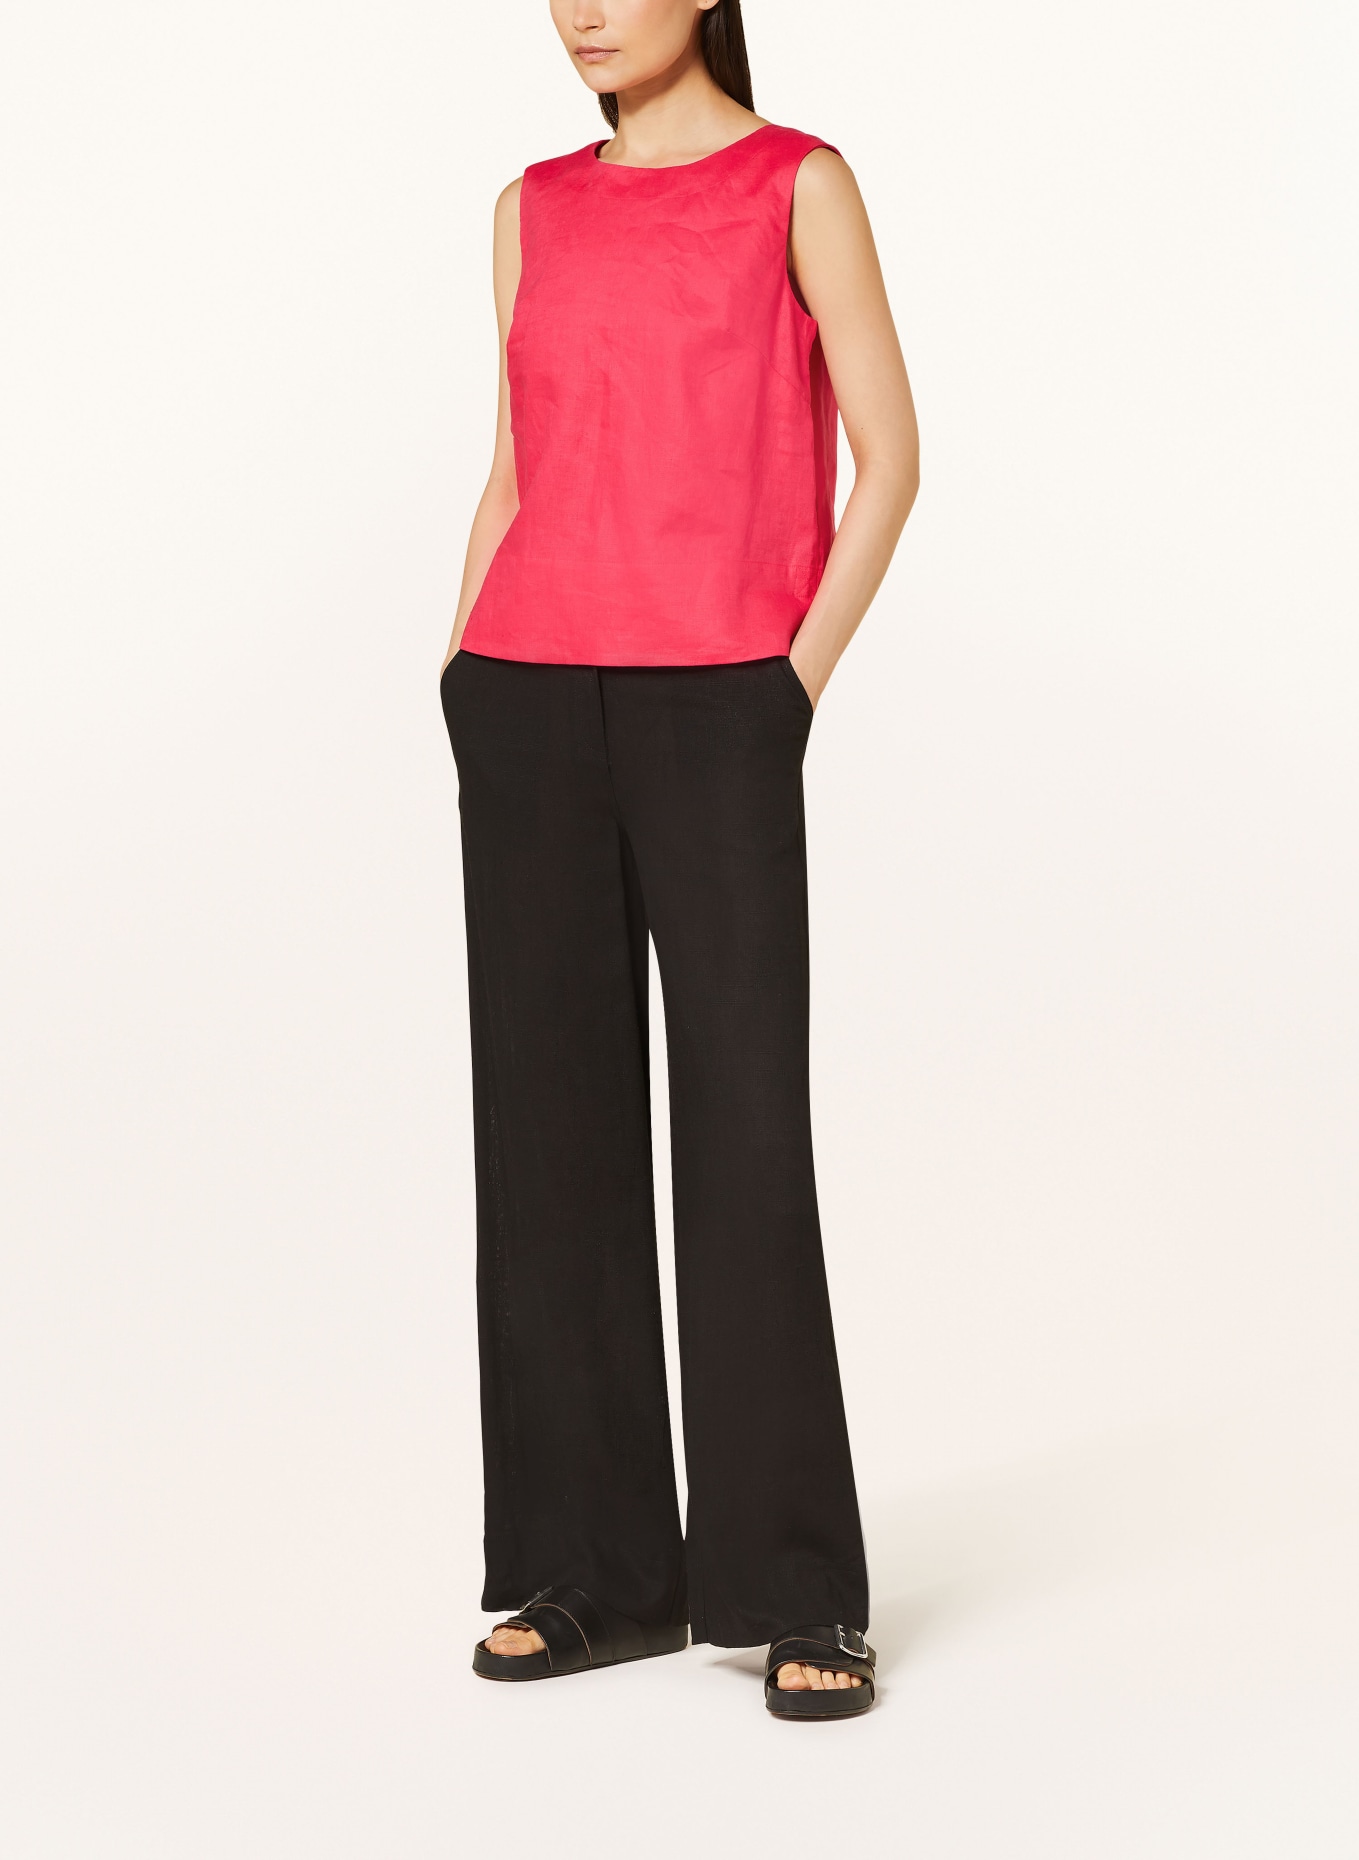 HOBBS Blouse top MALINDI in linen, Color: PINK (Image 2)